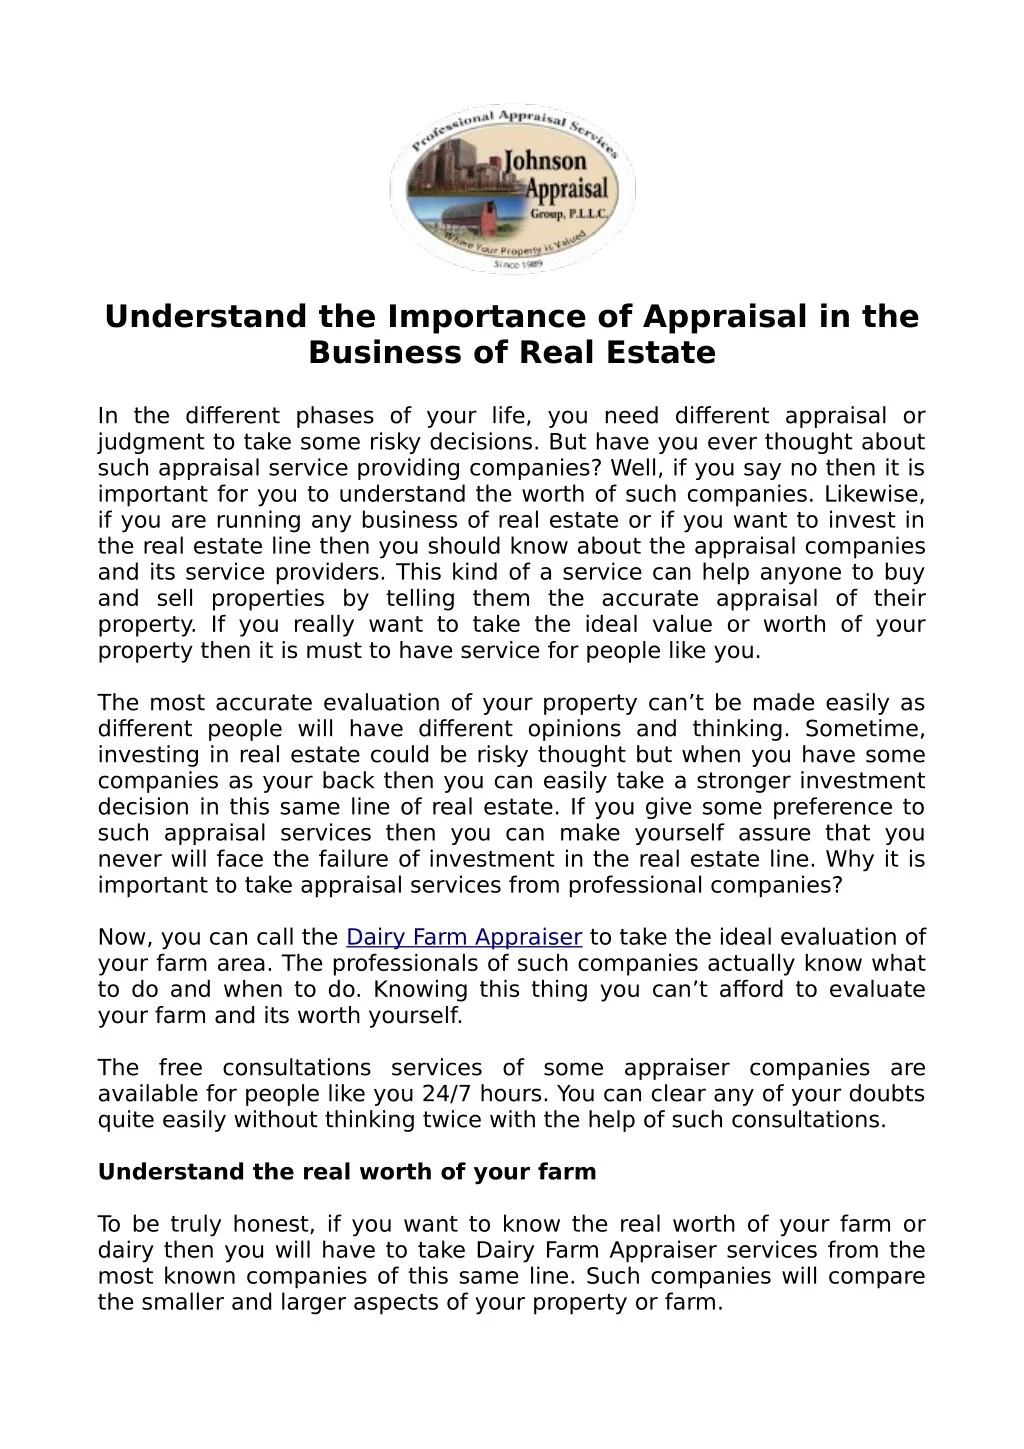 understand the importance of appraisal